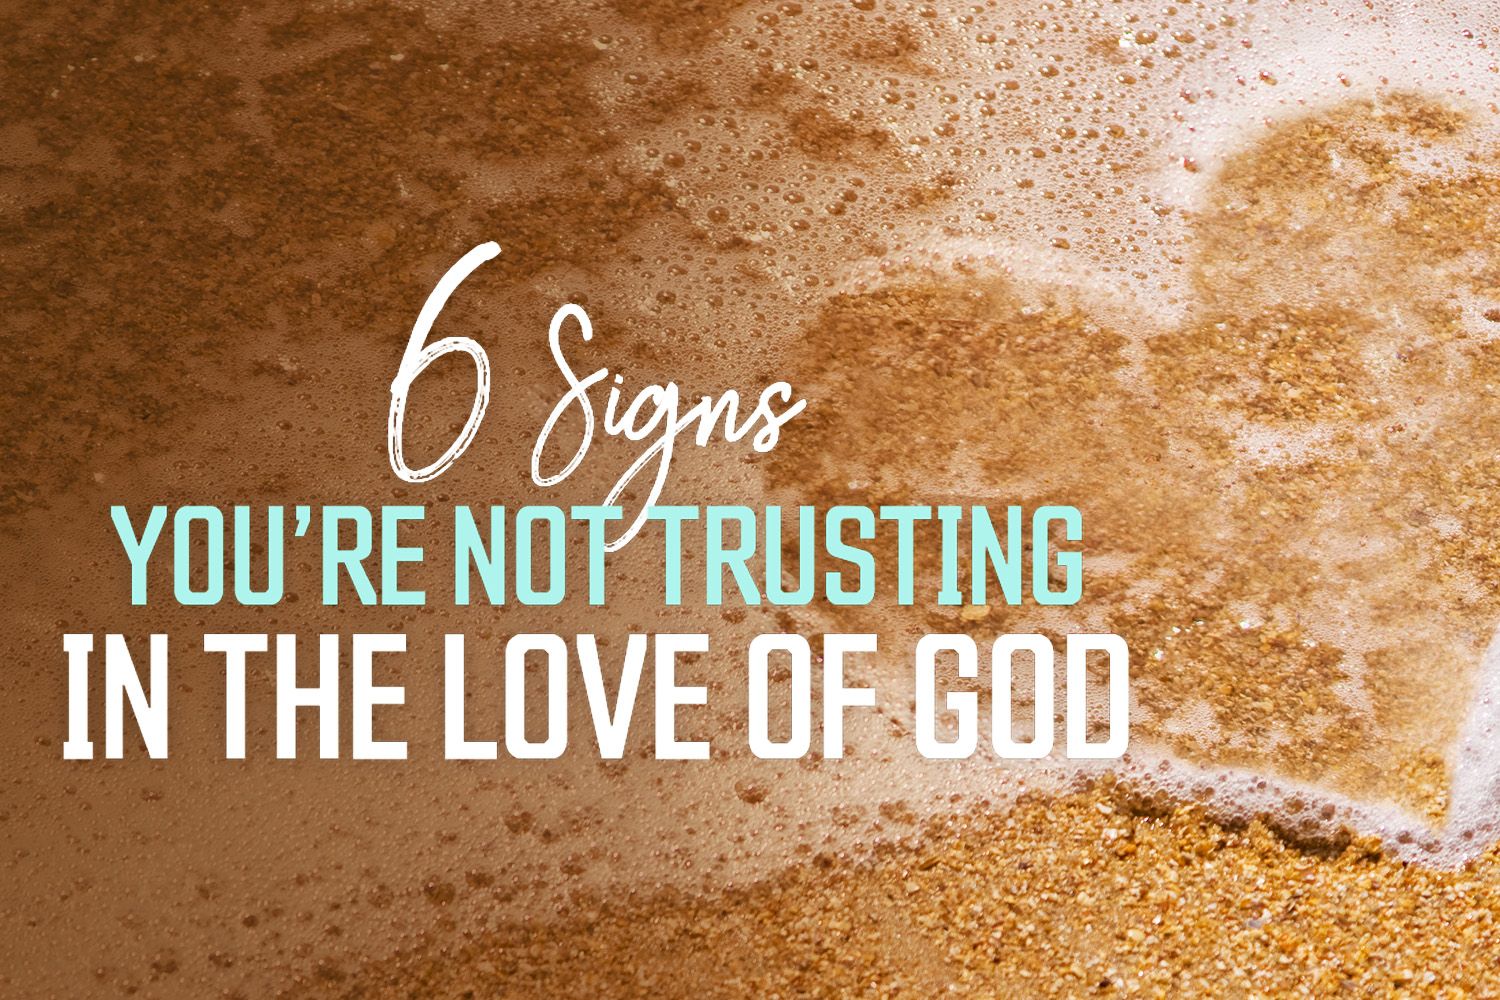 6 signs you're not trusting the love of god blog post